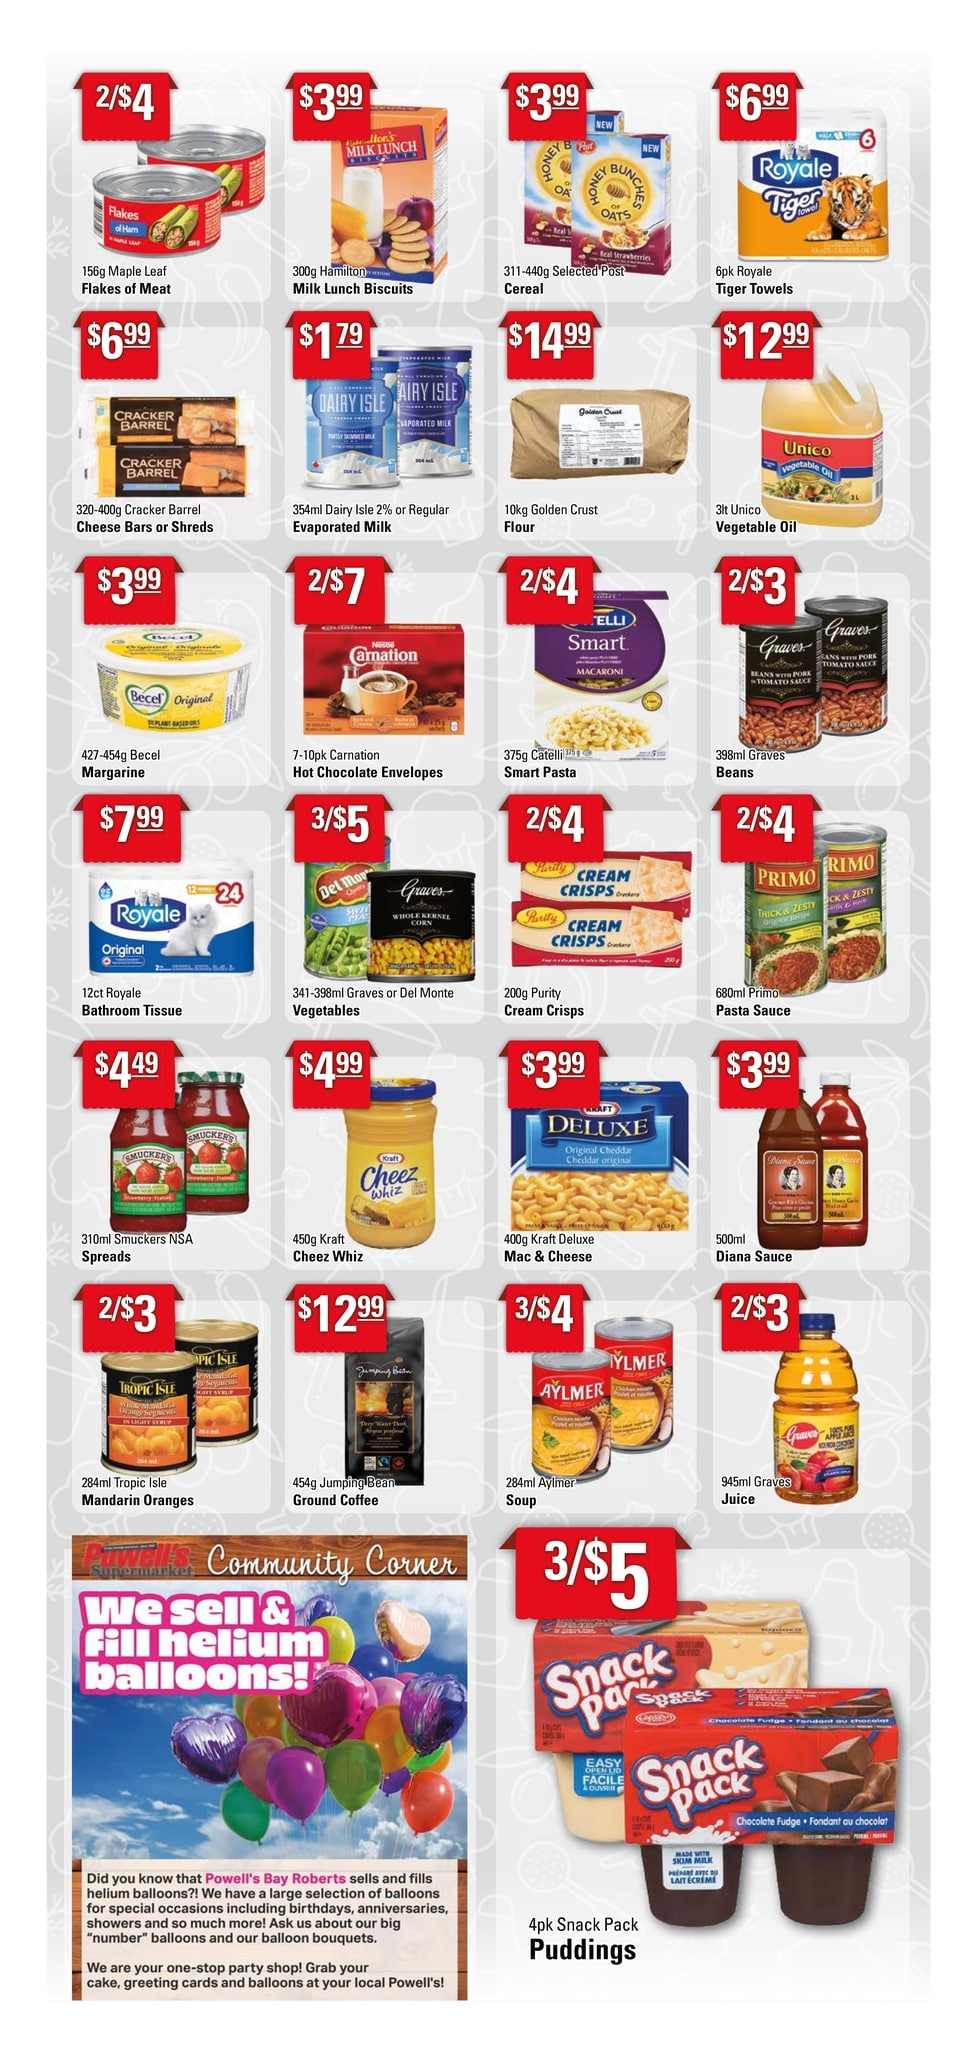 Powell's Supermarket - Weekly Flyer Specials - Page 2